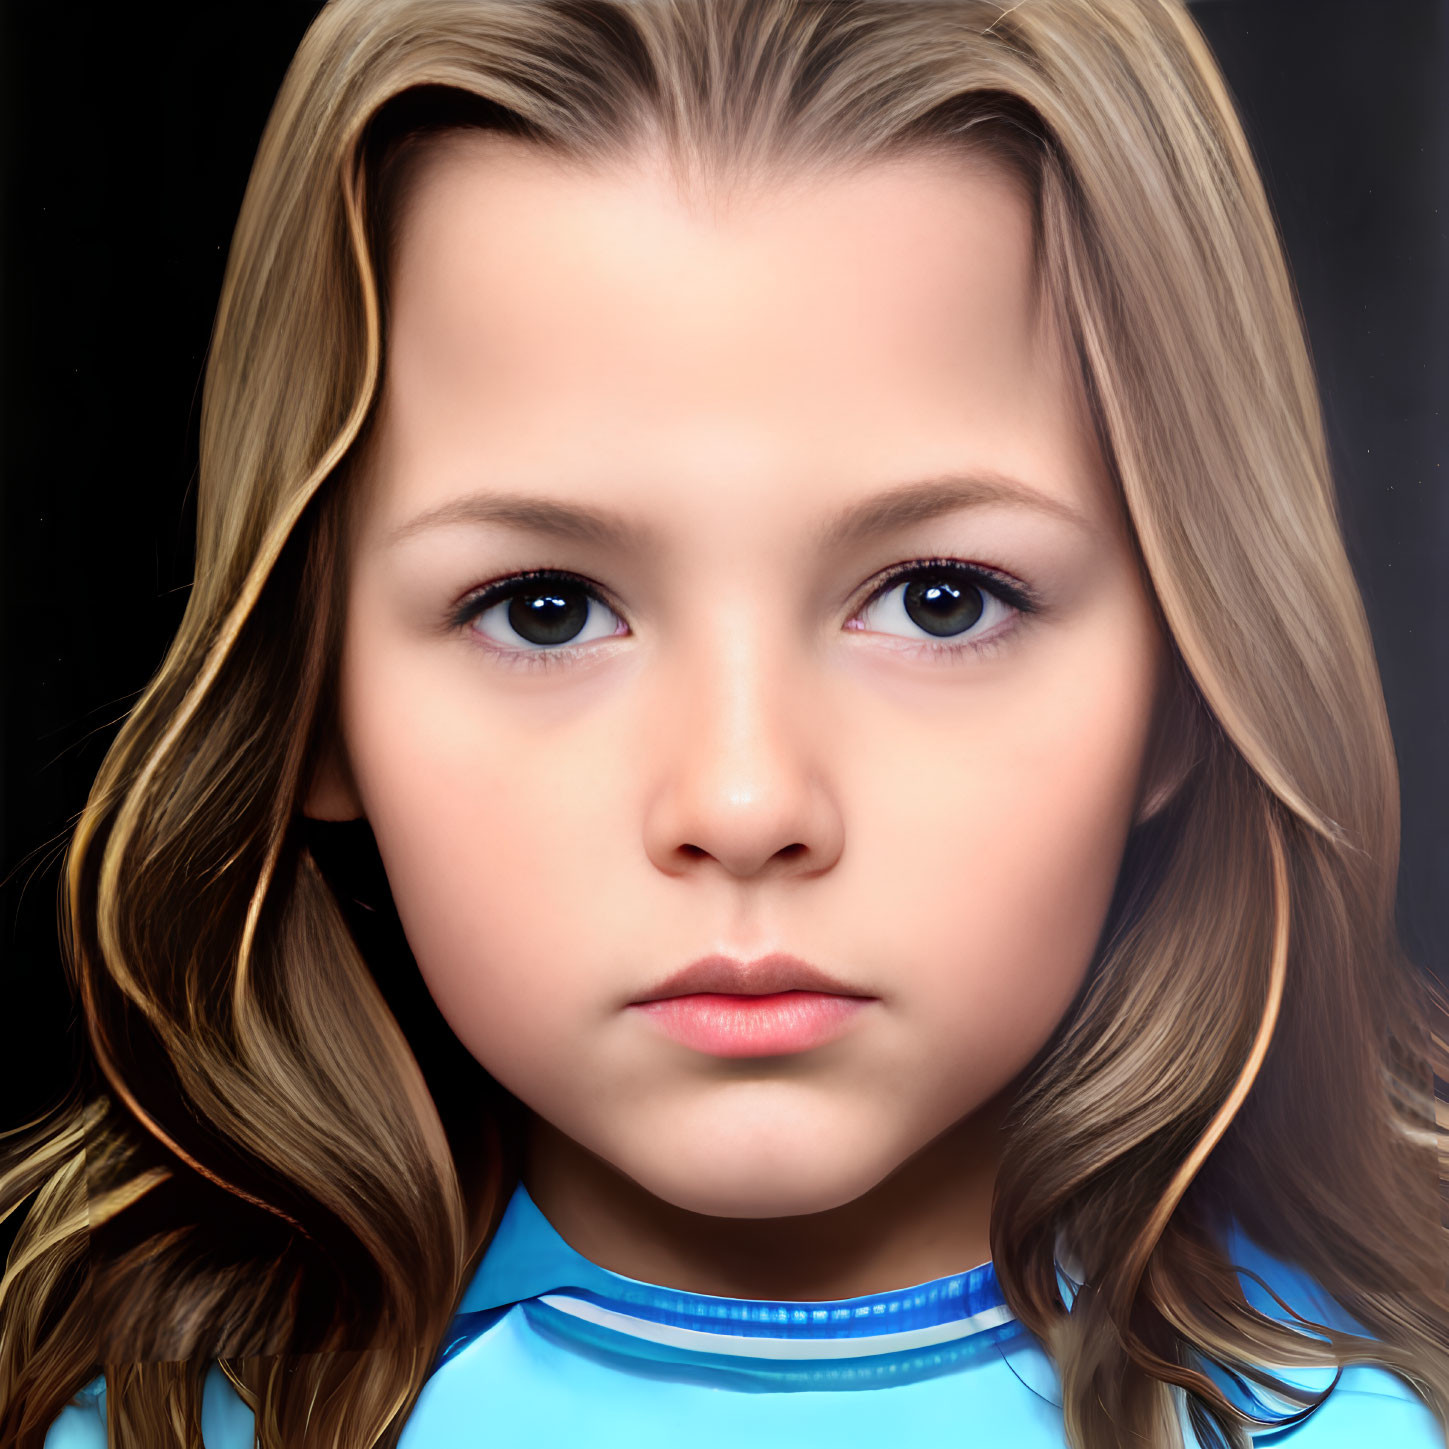 Young girl with long brown hair and big brown eyes in light blue top on dark background